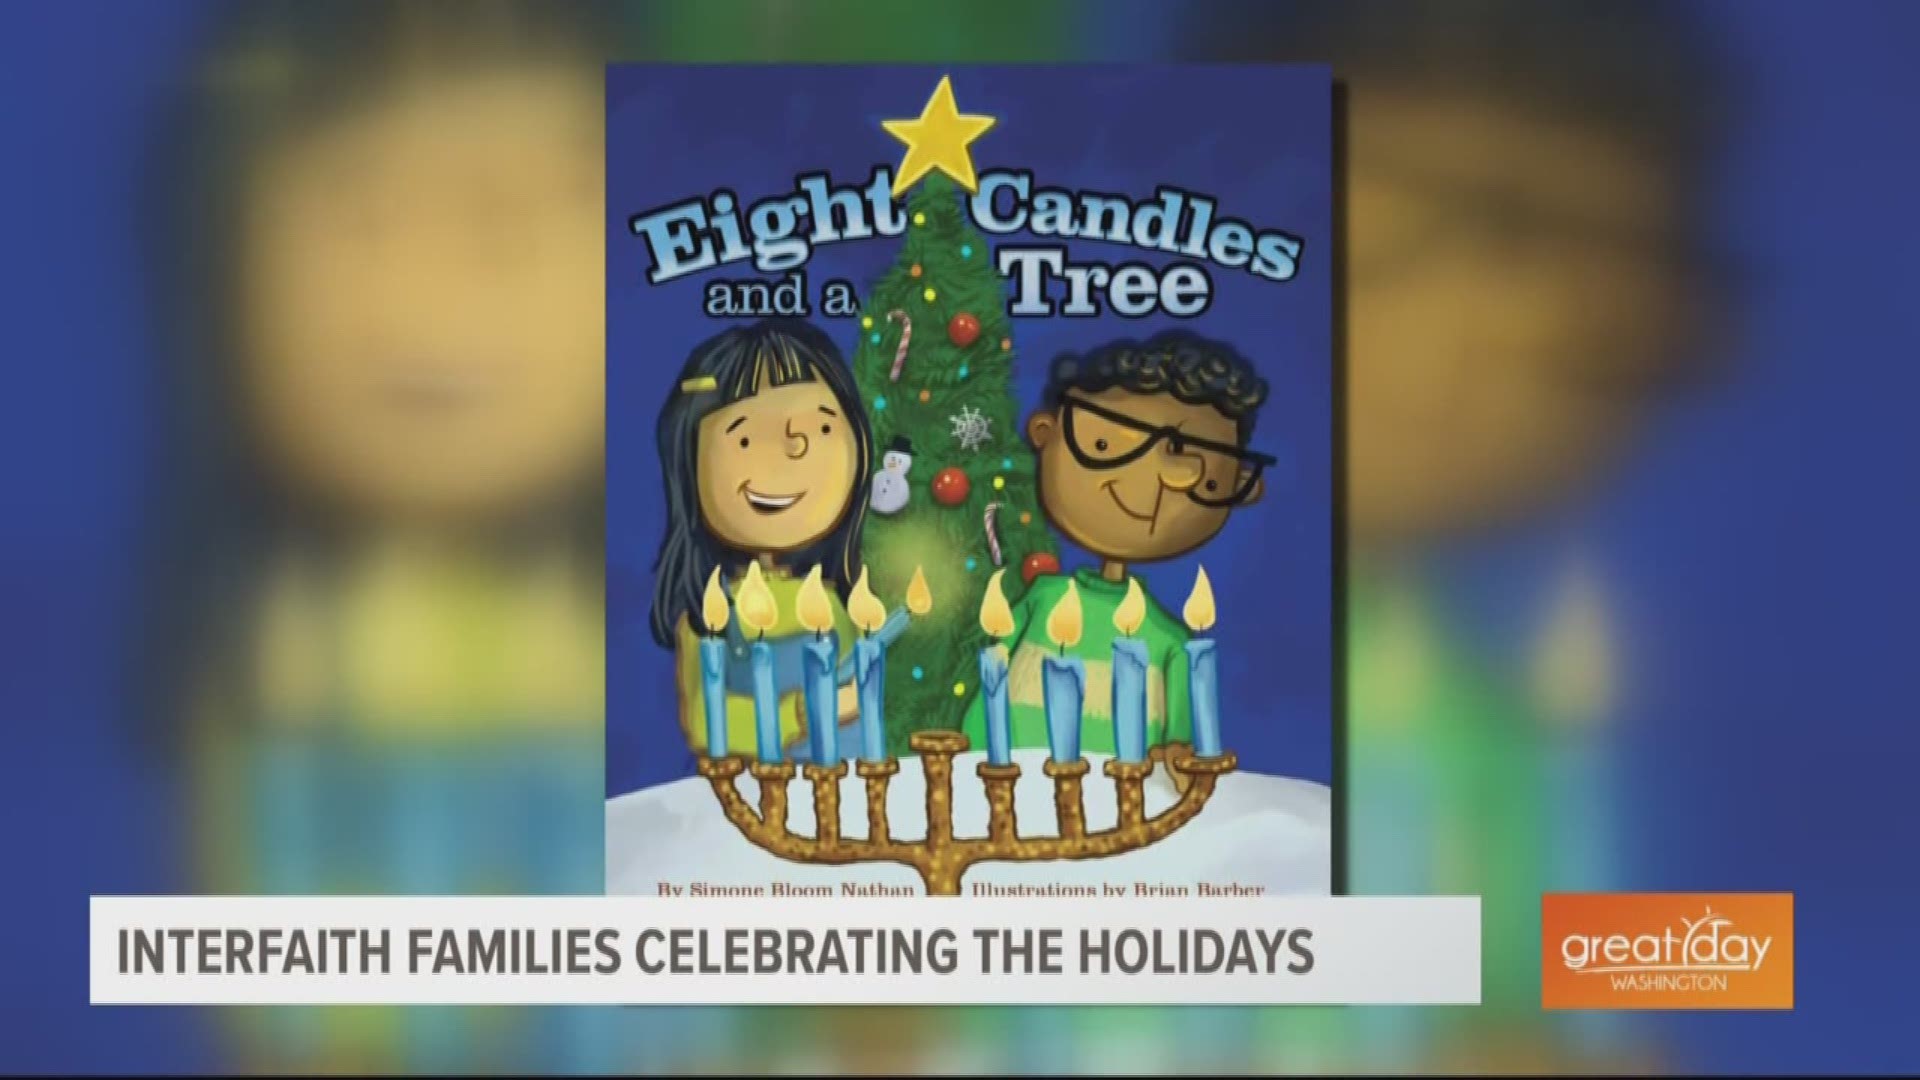 Simone Bloom Nathan, author of "Eight Candles and a Tree" wrote the book to help her family and others of different faiths celebrate Christmas and Hanukkah together.